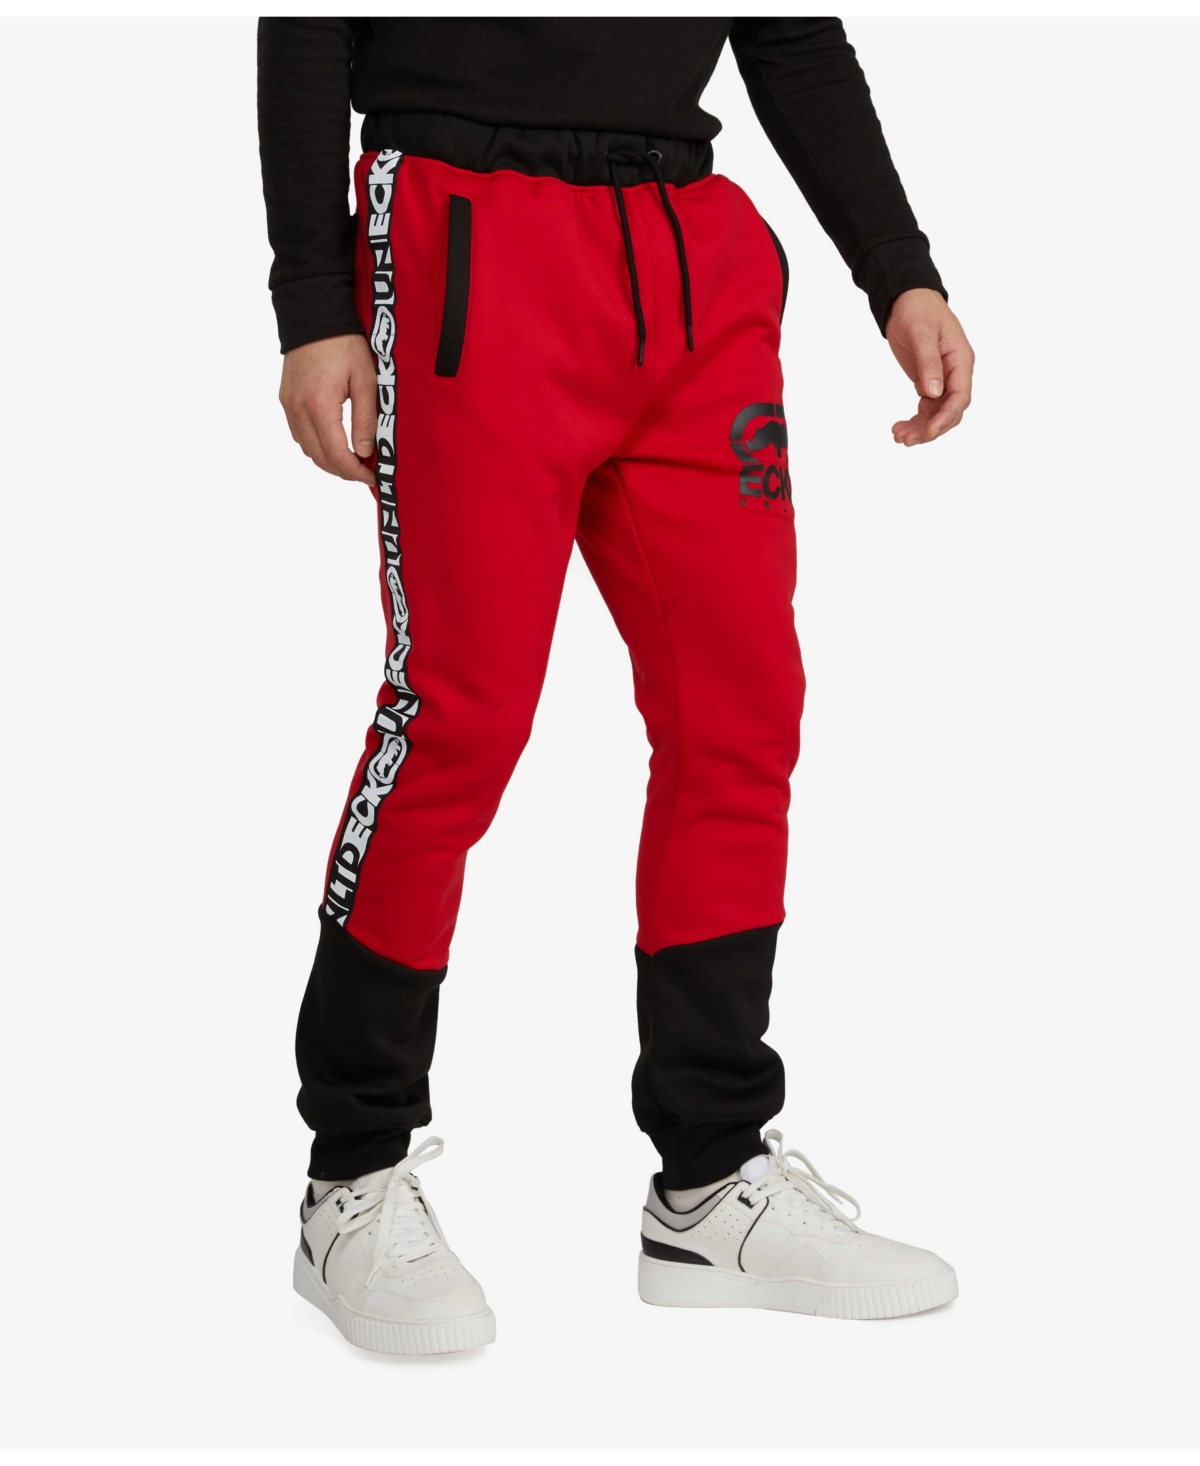 Men's Big and Tall Basic Blocked Tape Joggers - Red